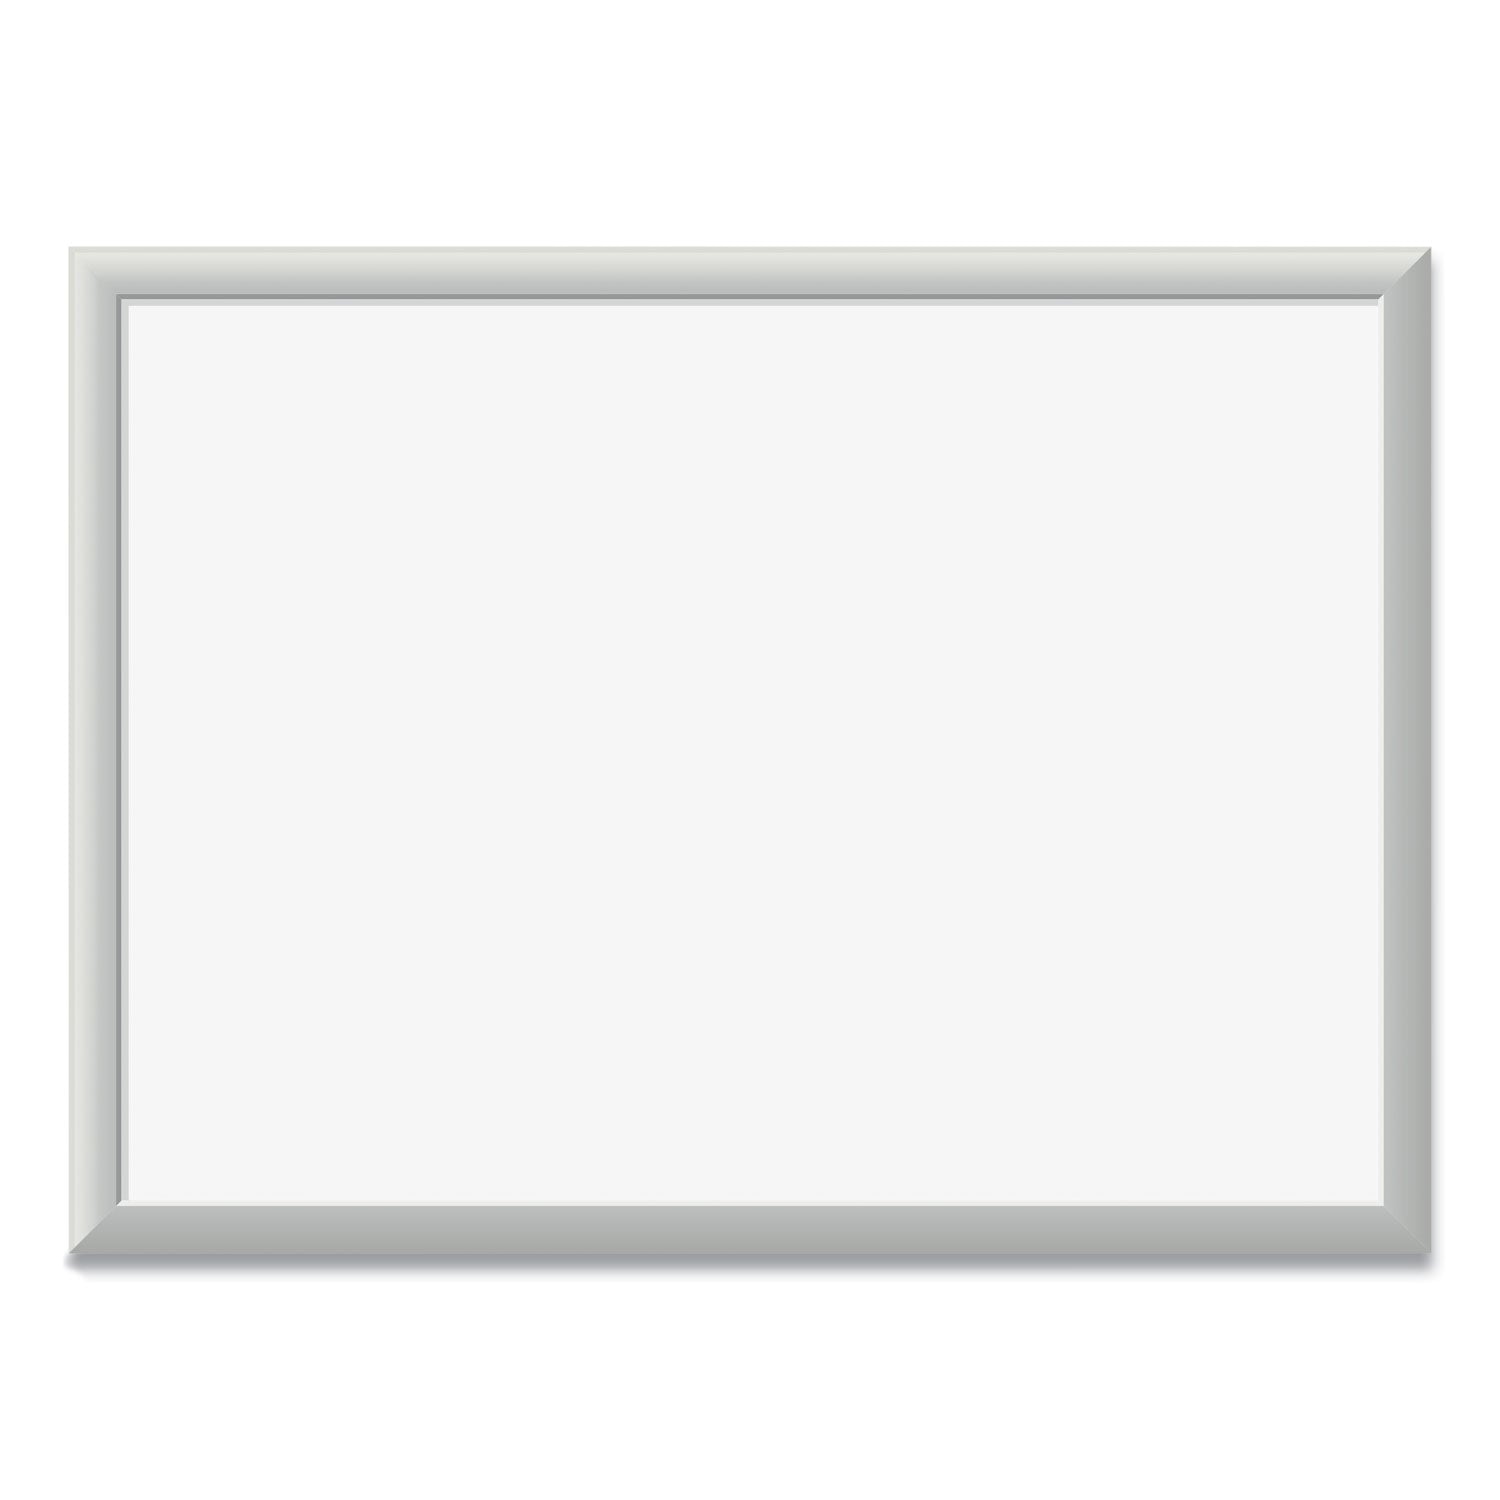 magnetic-dry-erase-board-with-aluminum-frame-23-x-17-white-surface-silver-frame_ubr070u0001 - 1